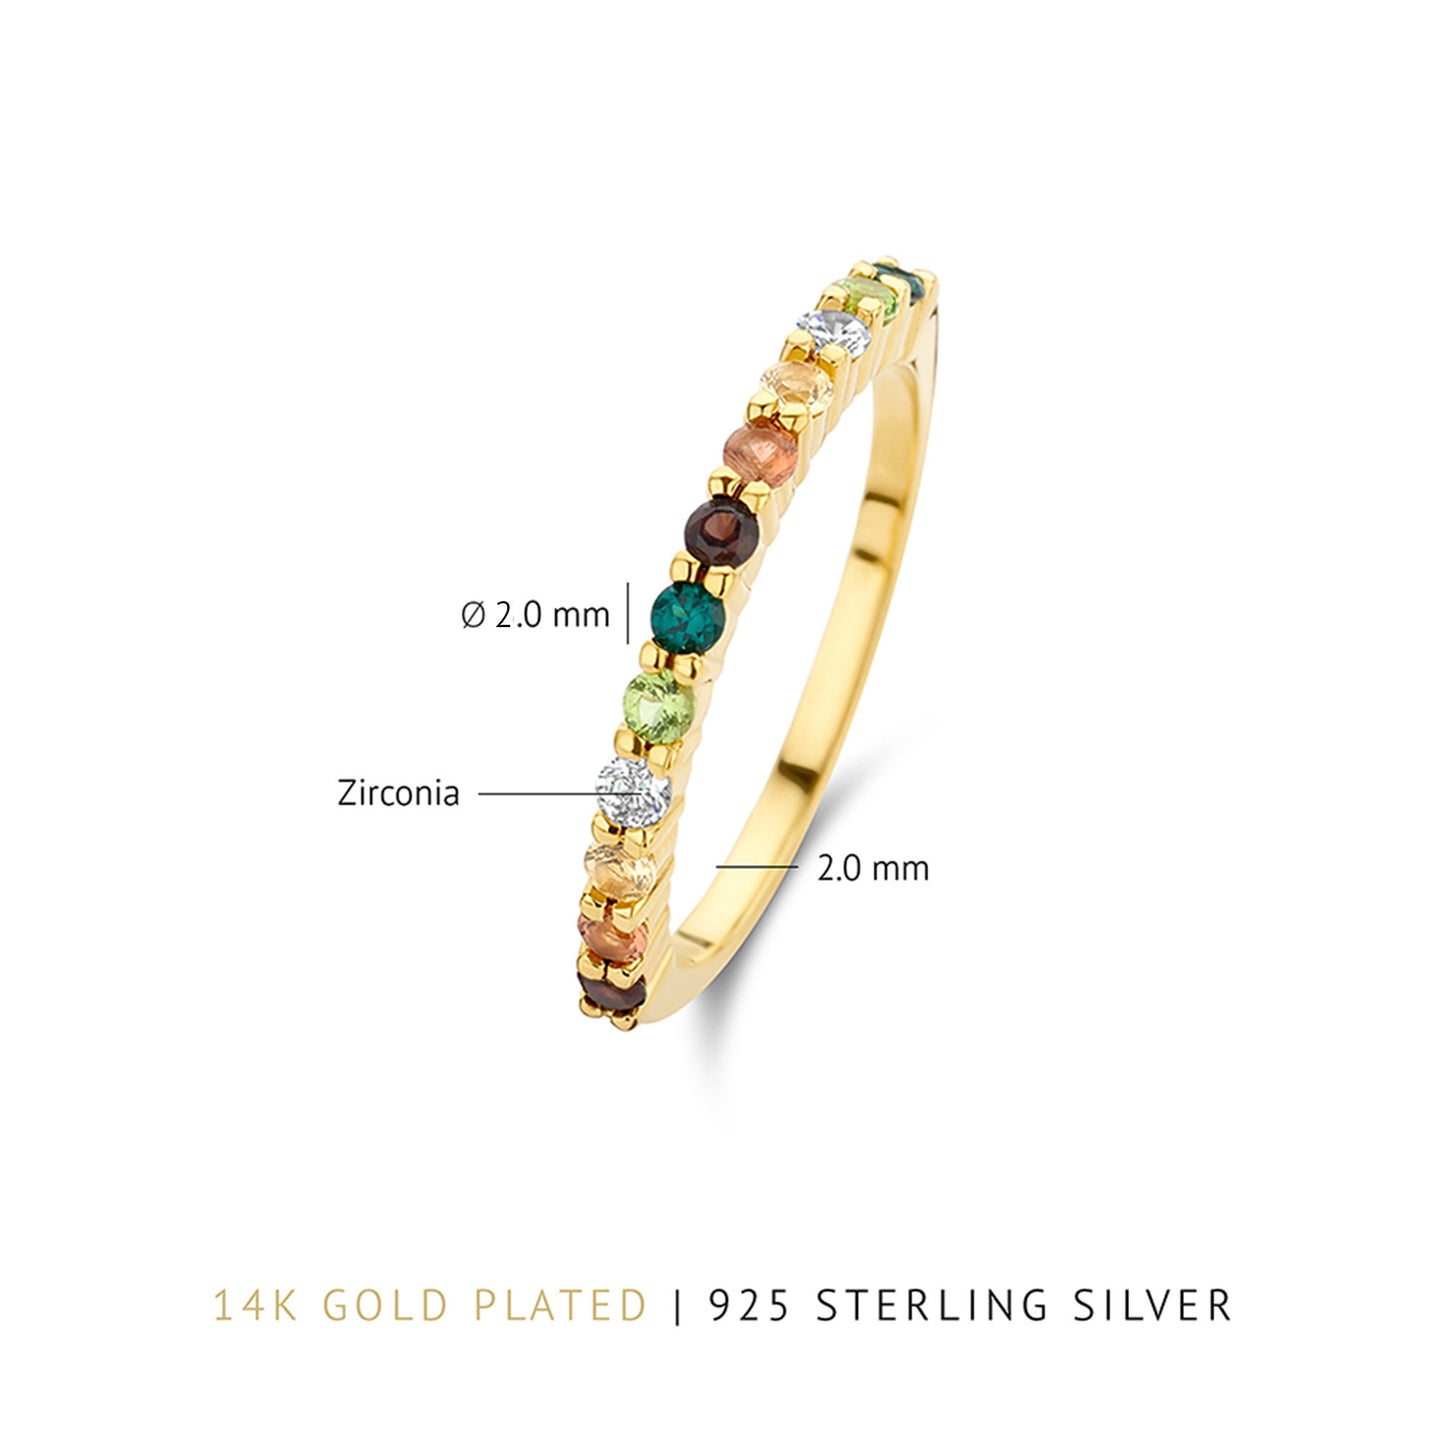 Santa Maria del Fiore 925 sterling silver gold plated ring with coloured zirconia stones